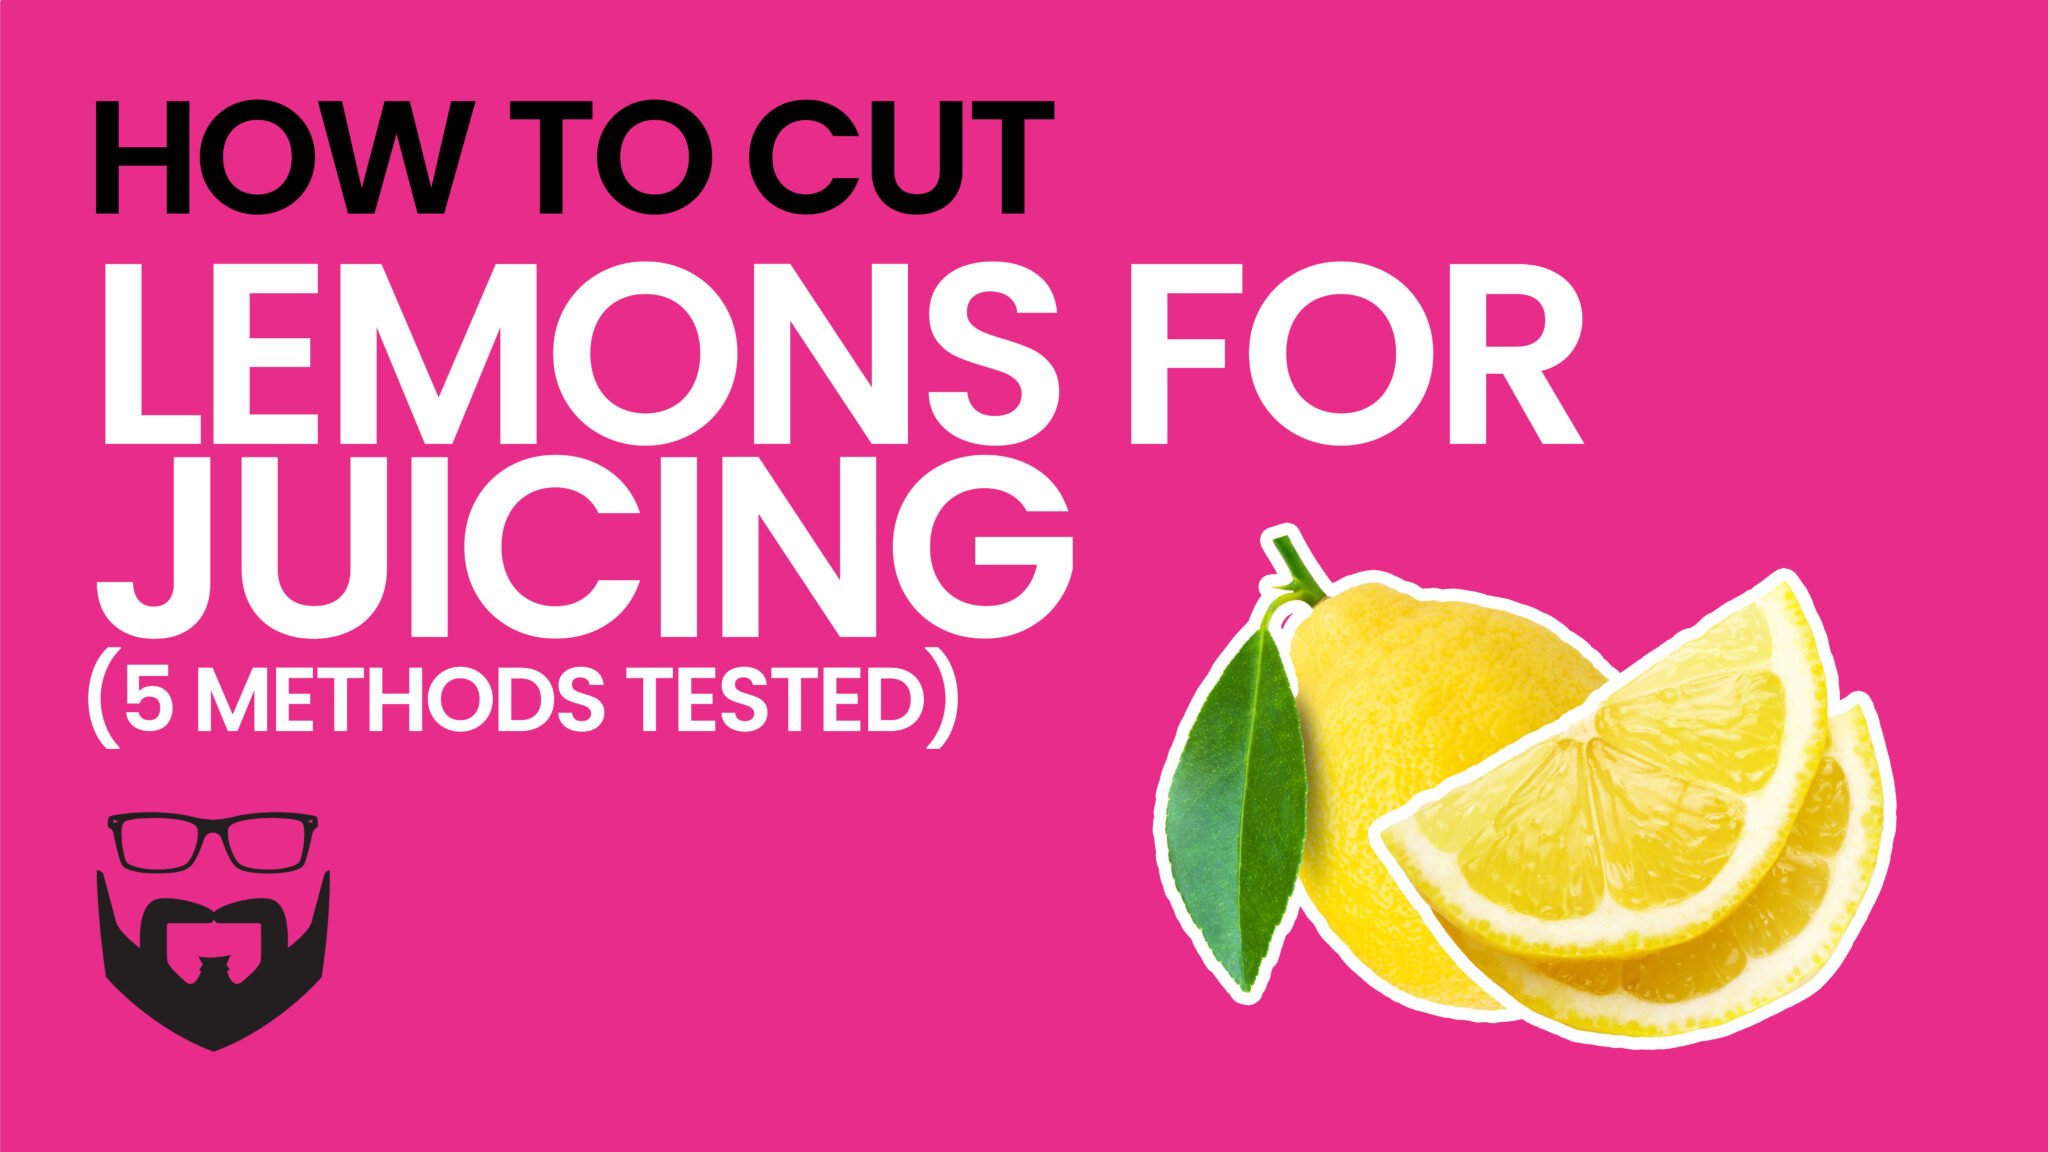 How to Cut Lemons for Juicing (5 Methods Tested) Video - Pink